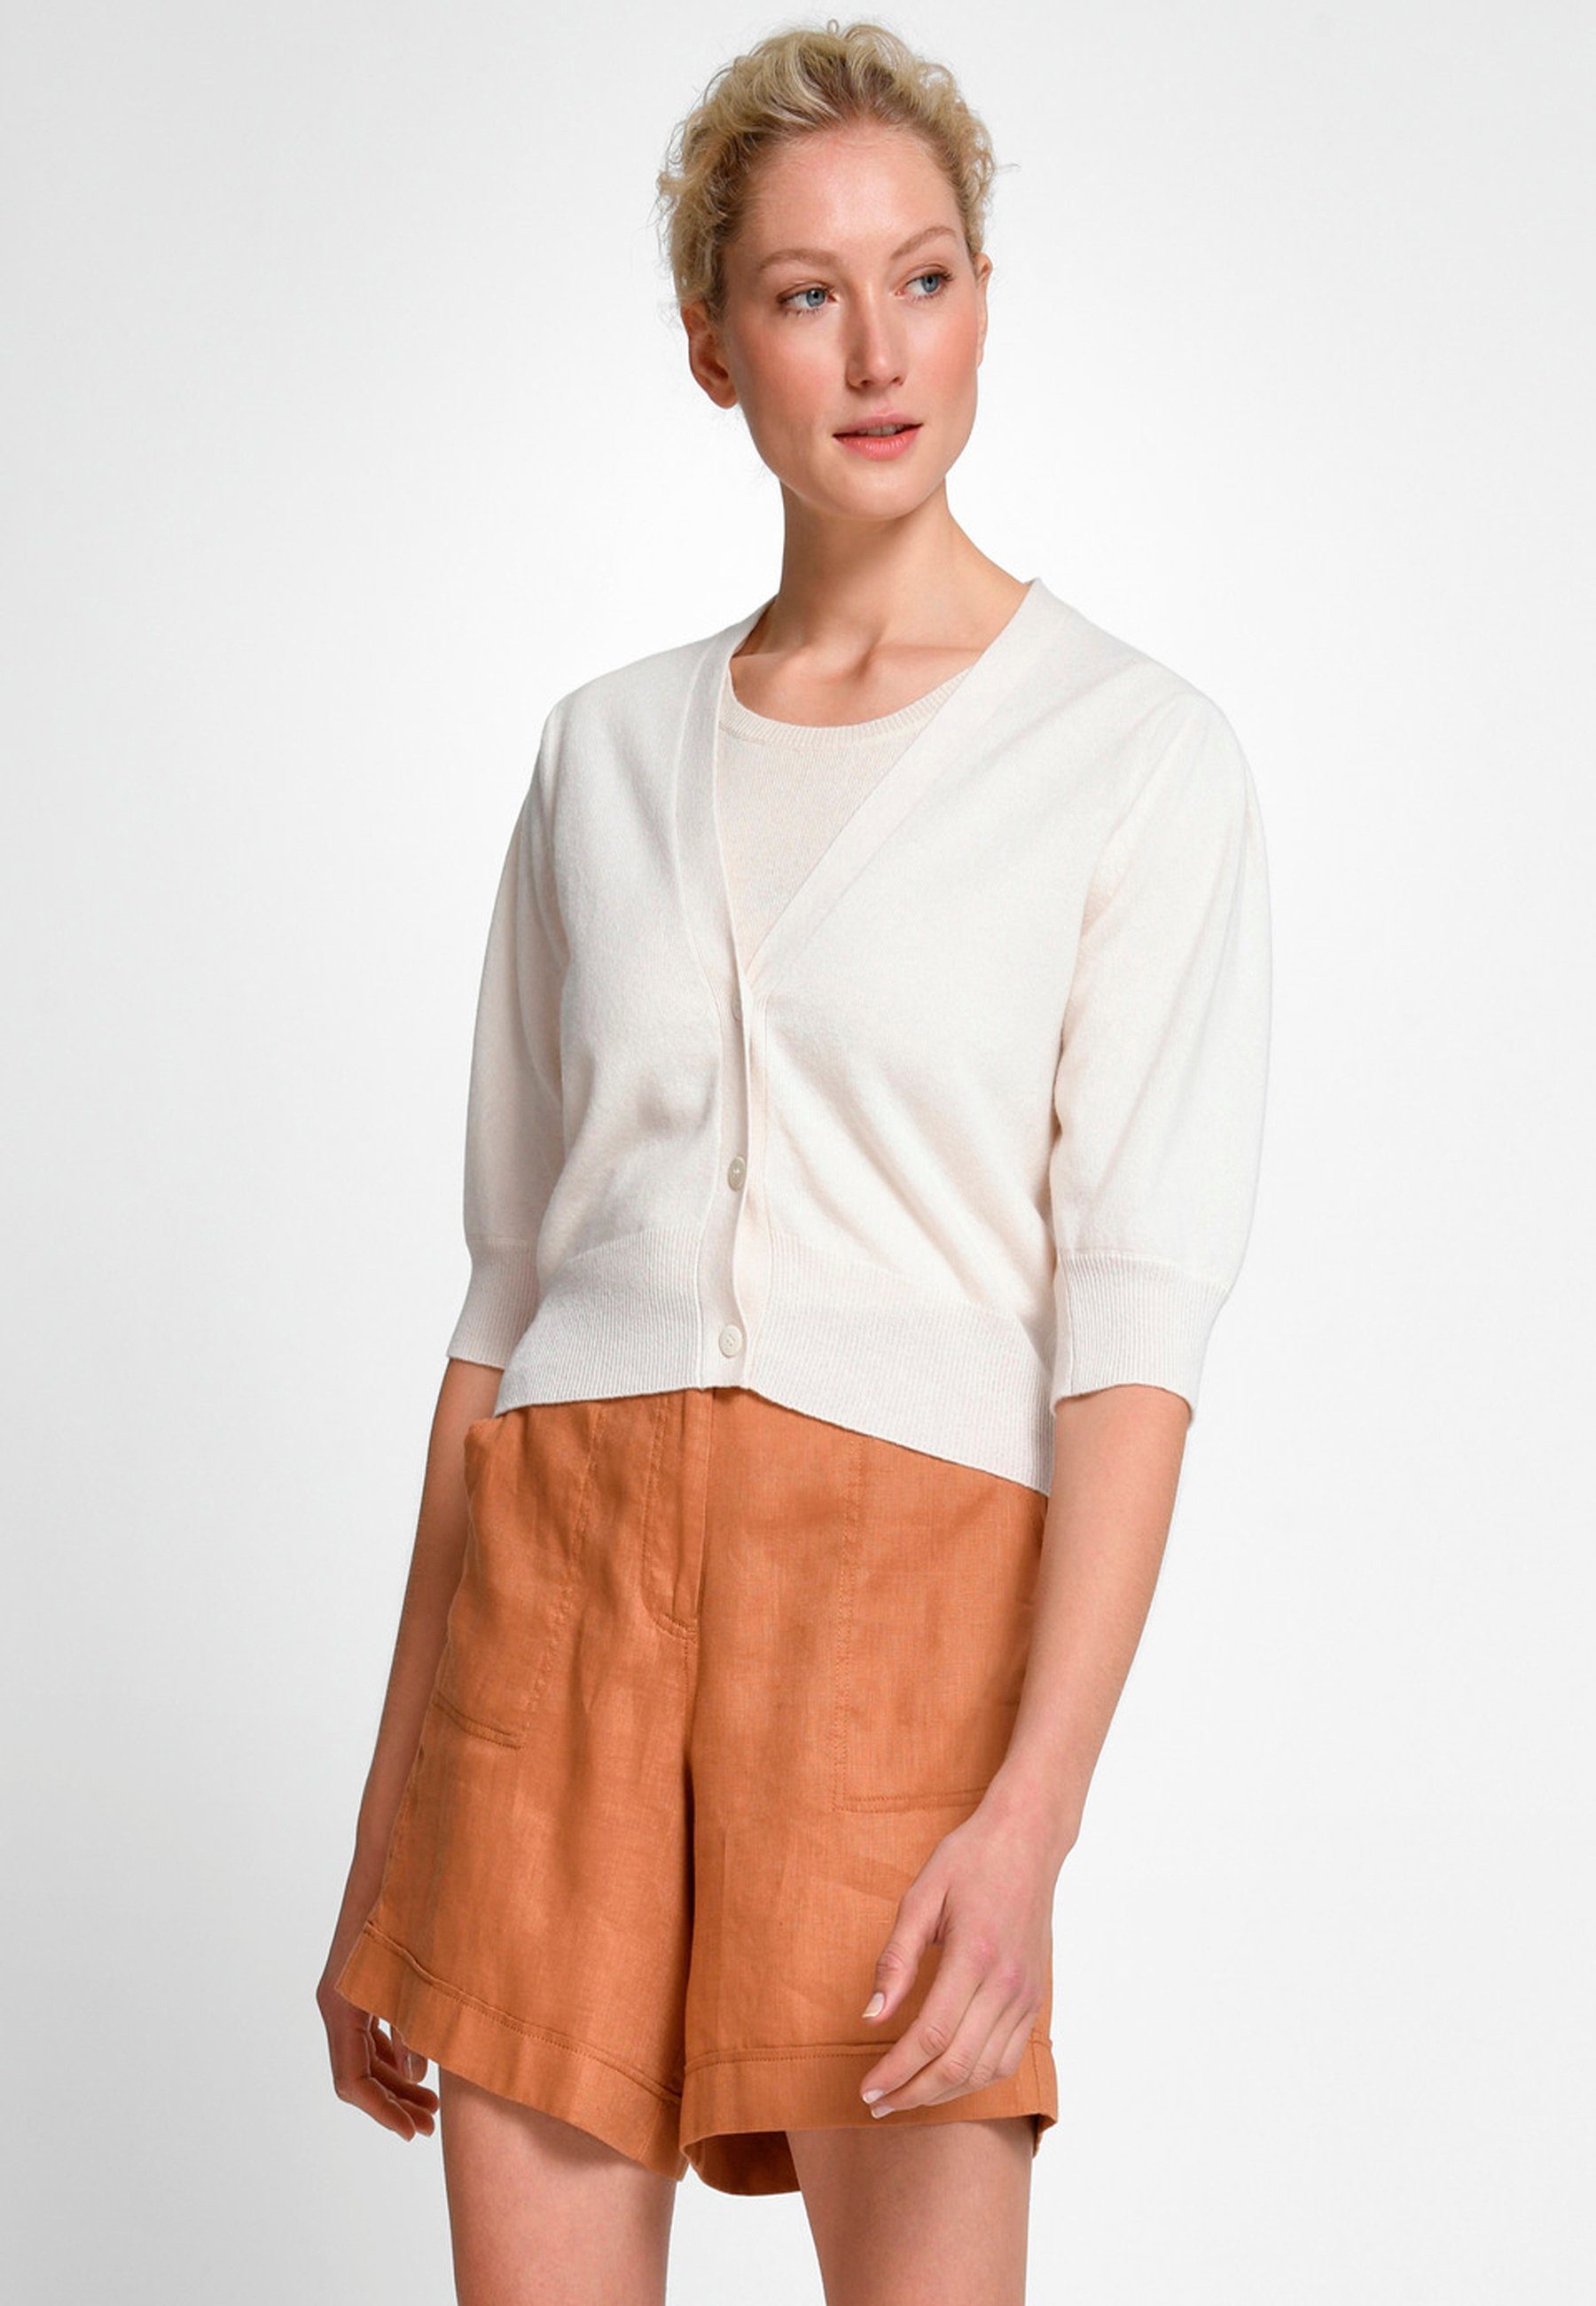 wollweiss Cashmere Cardigan include